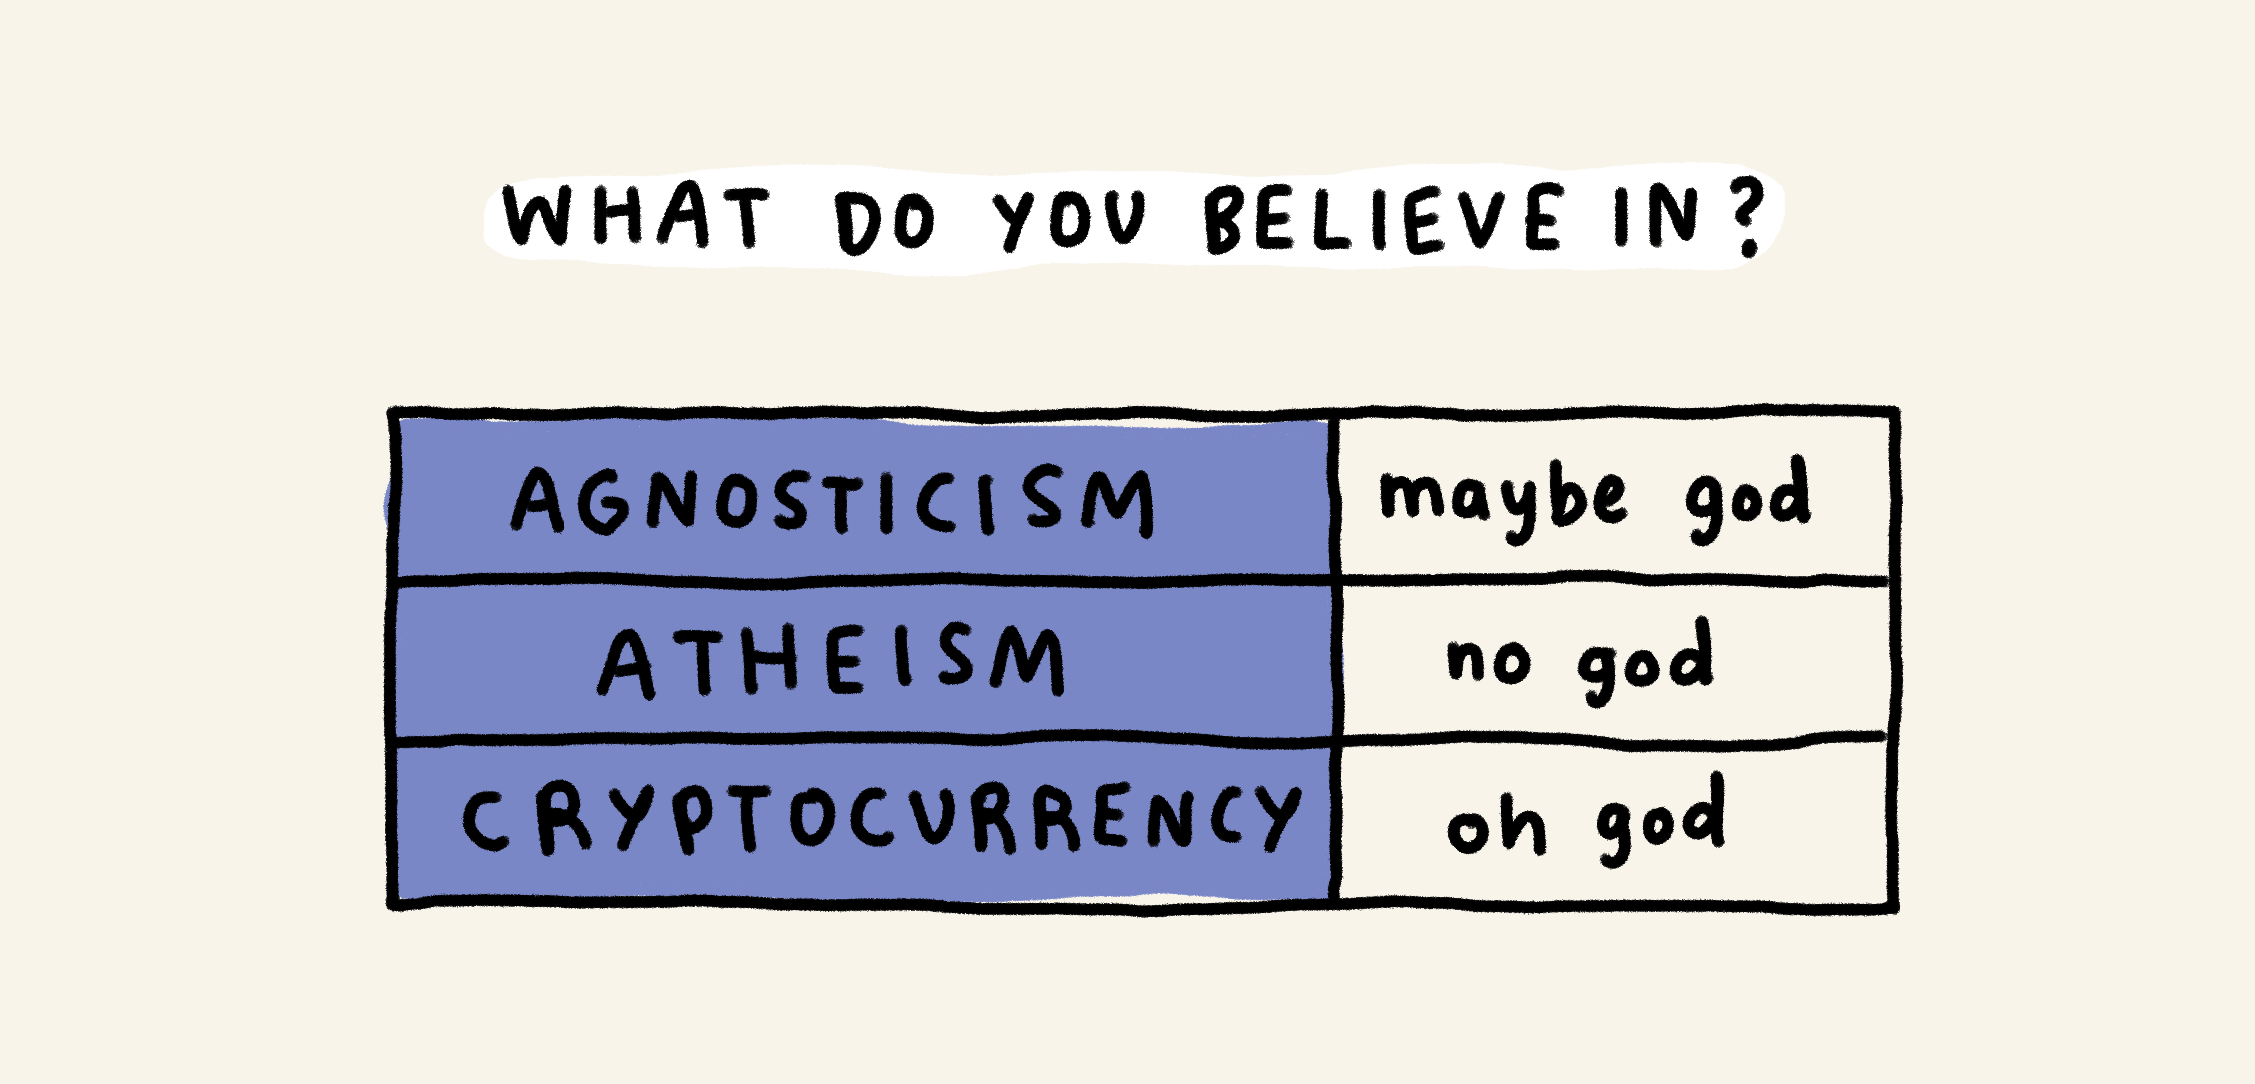 What do you believe in?

Agnosticism: maybe god
Atheism: no god
Cryptocurrency: oh god